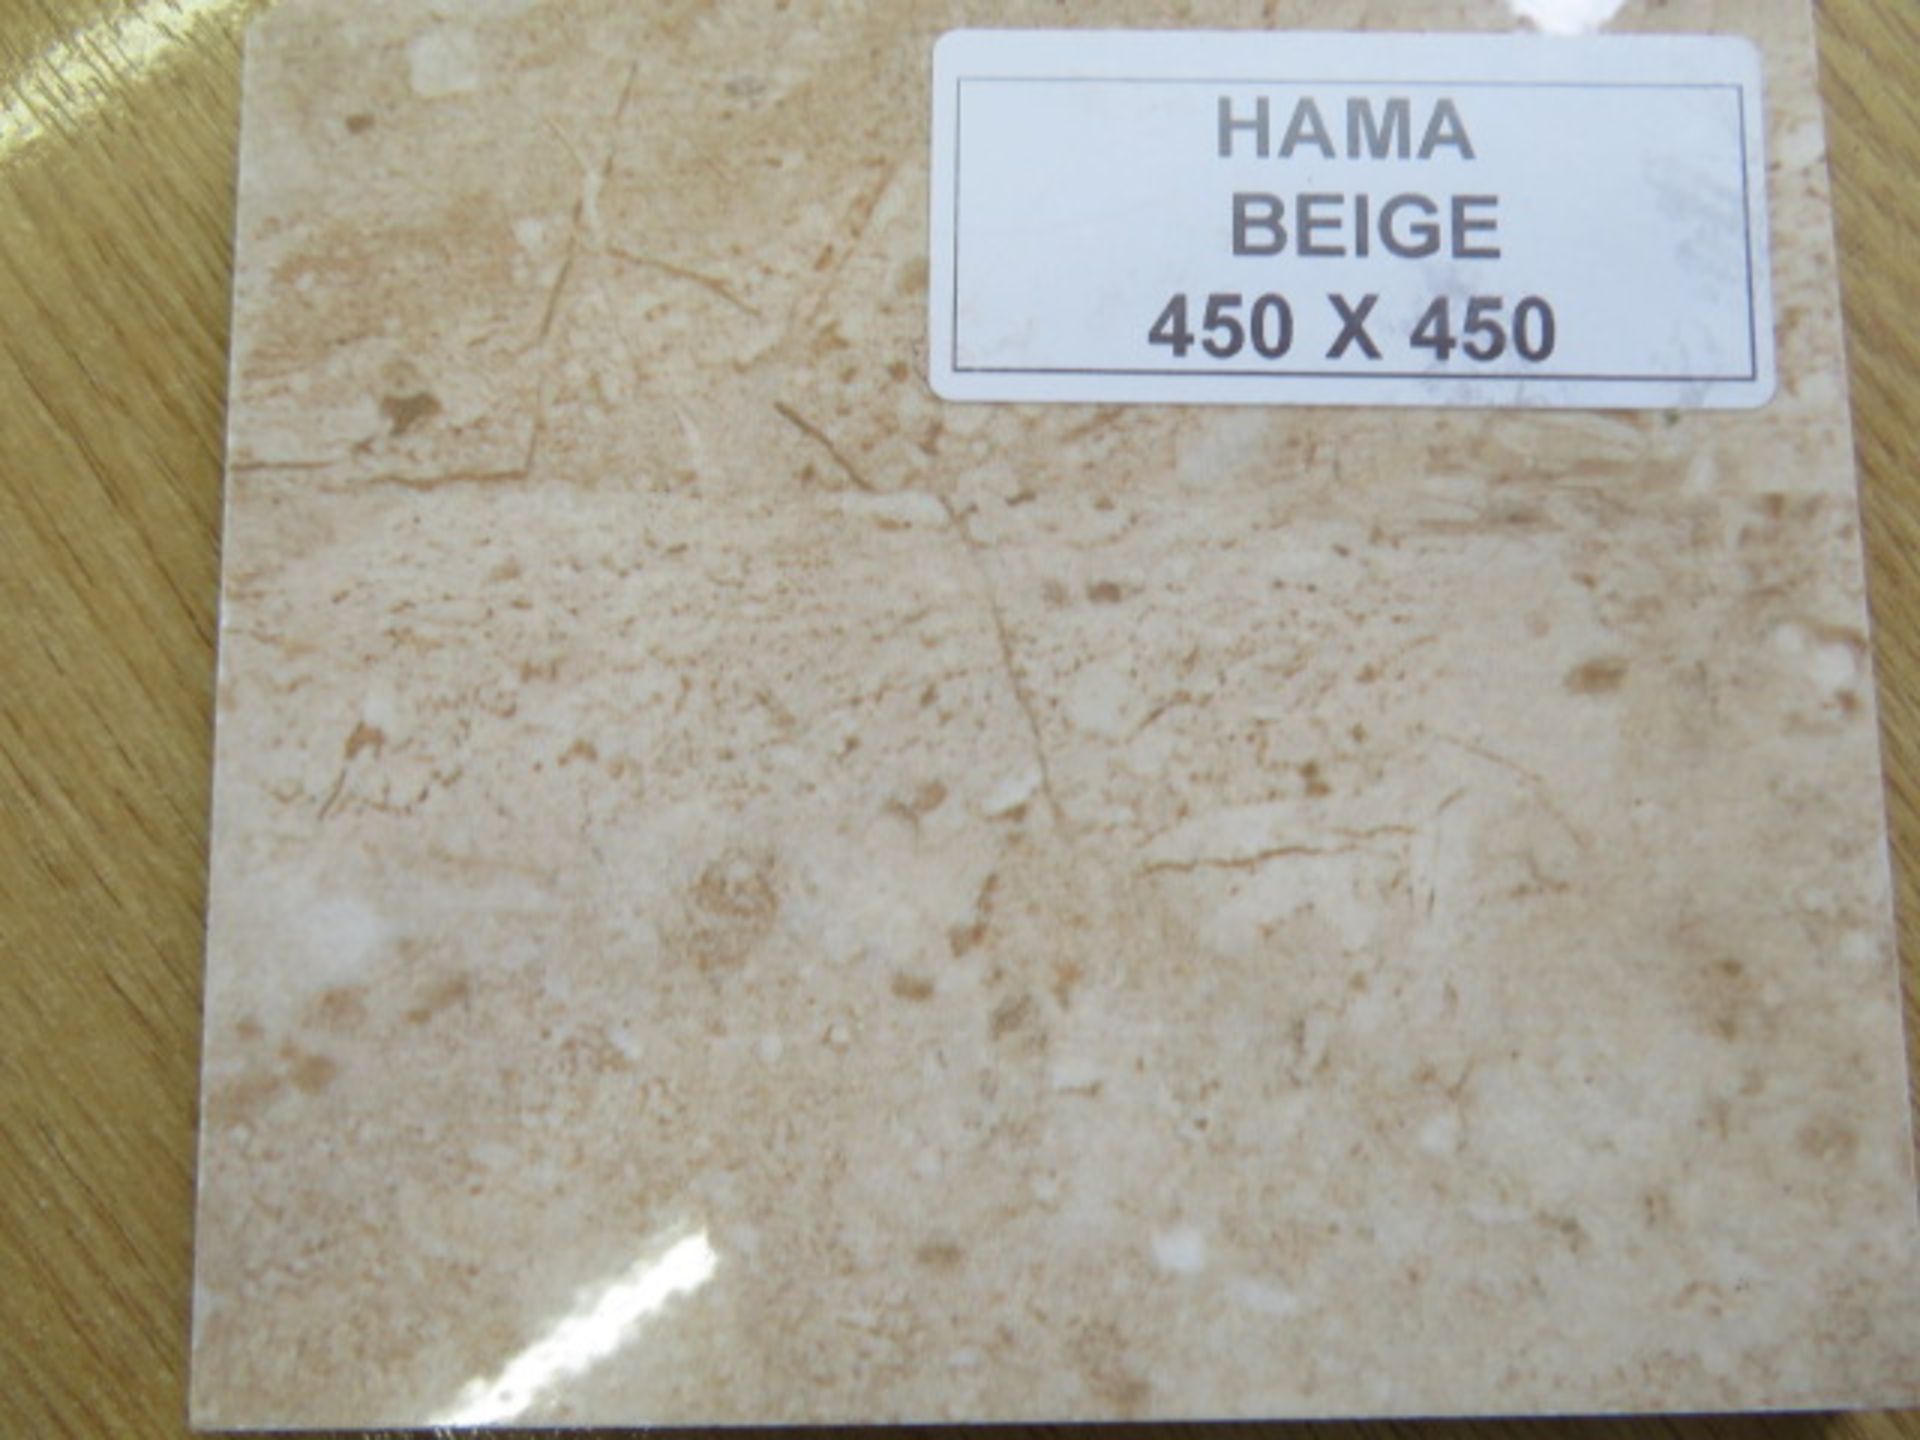 NEW 7.1 Square Meters of Hama Beige Wall and Floor Tiles. 450x450mm per tile, 10mm thick. 1.42... - Image 3 of 4